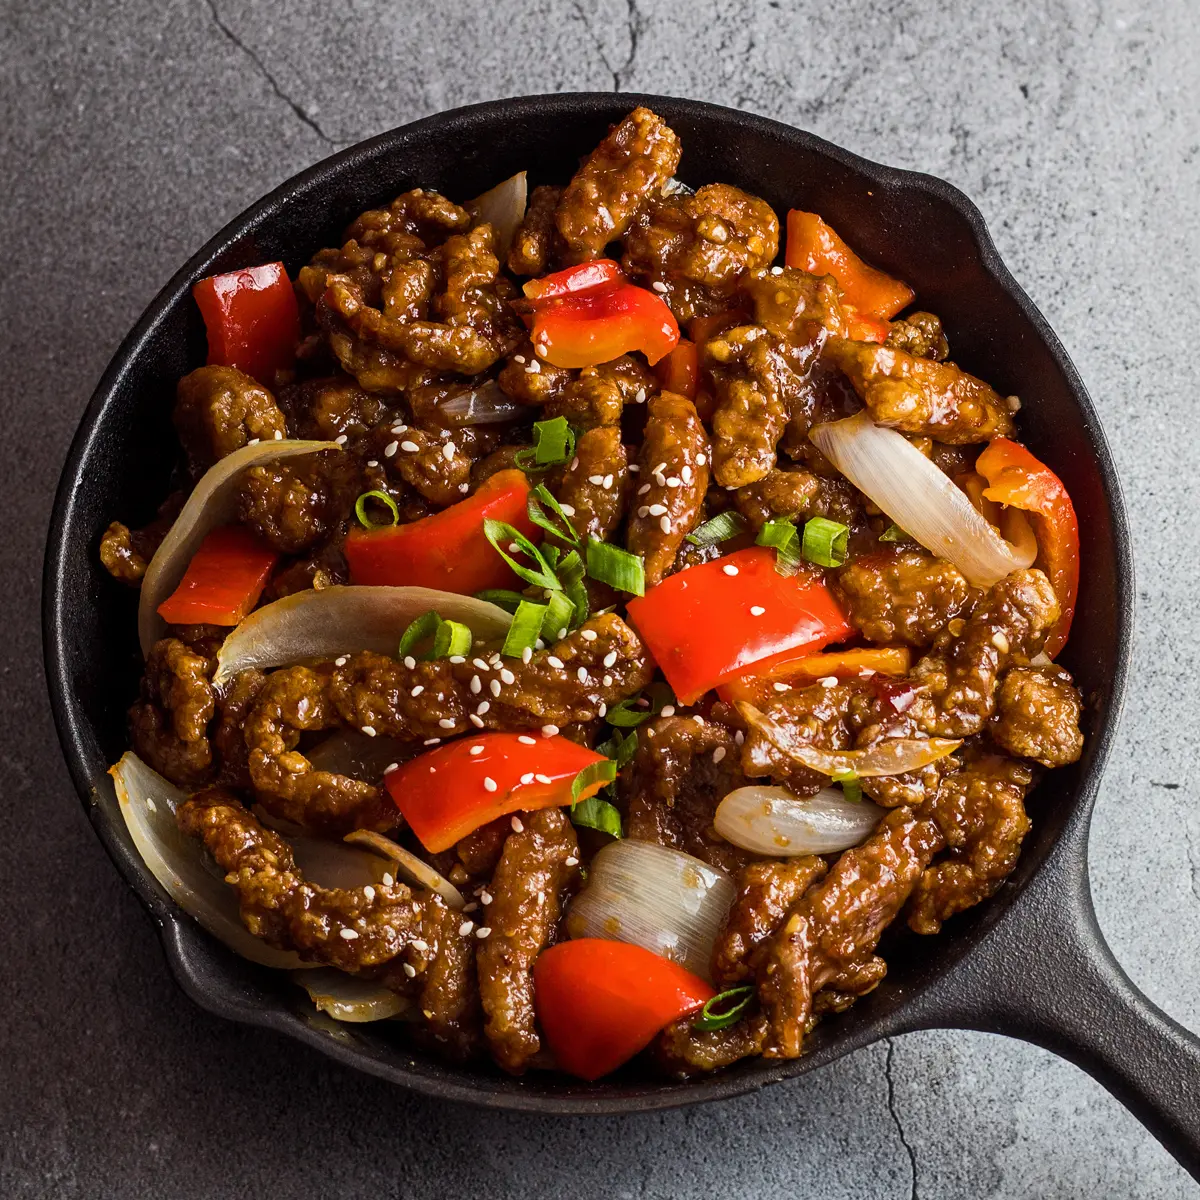 Large square overhead image of the panda express beijing beef served with wok fried crispy chunks of beef red pepper and onion in beijing sauce.